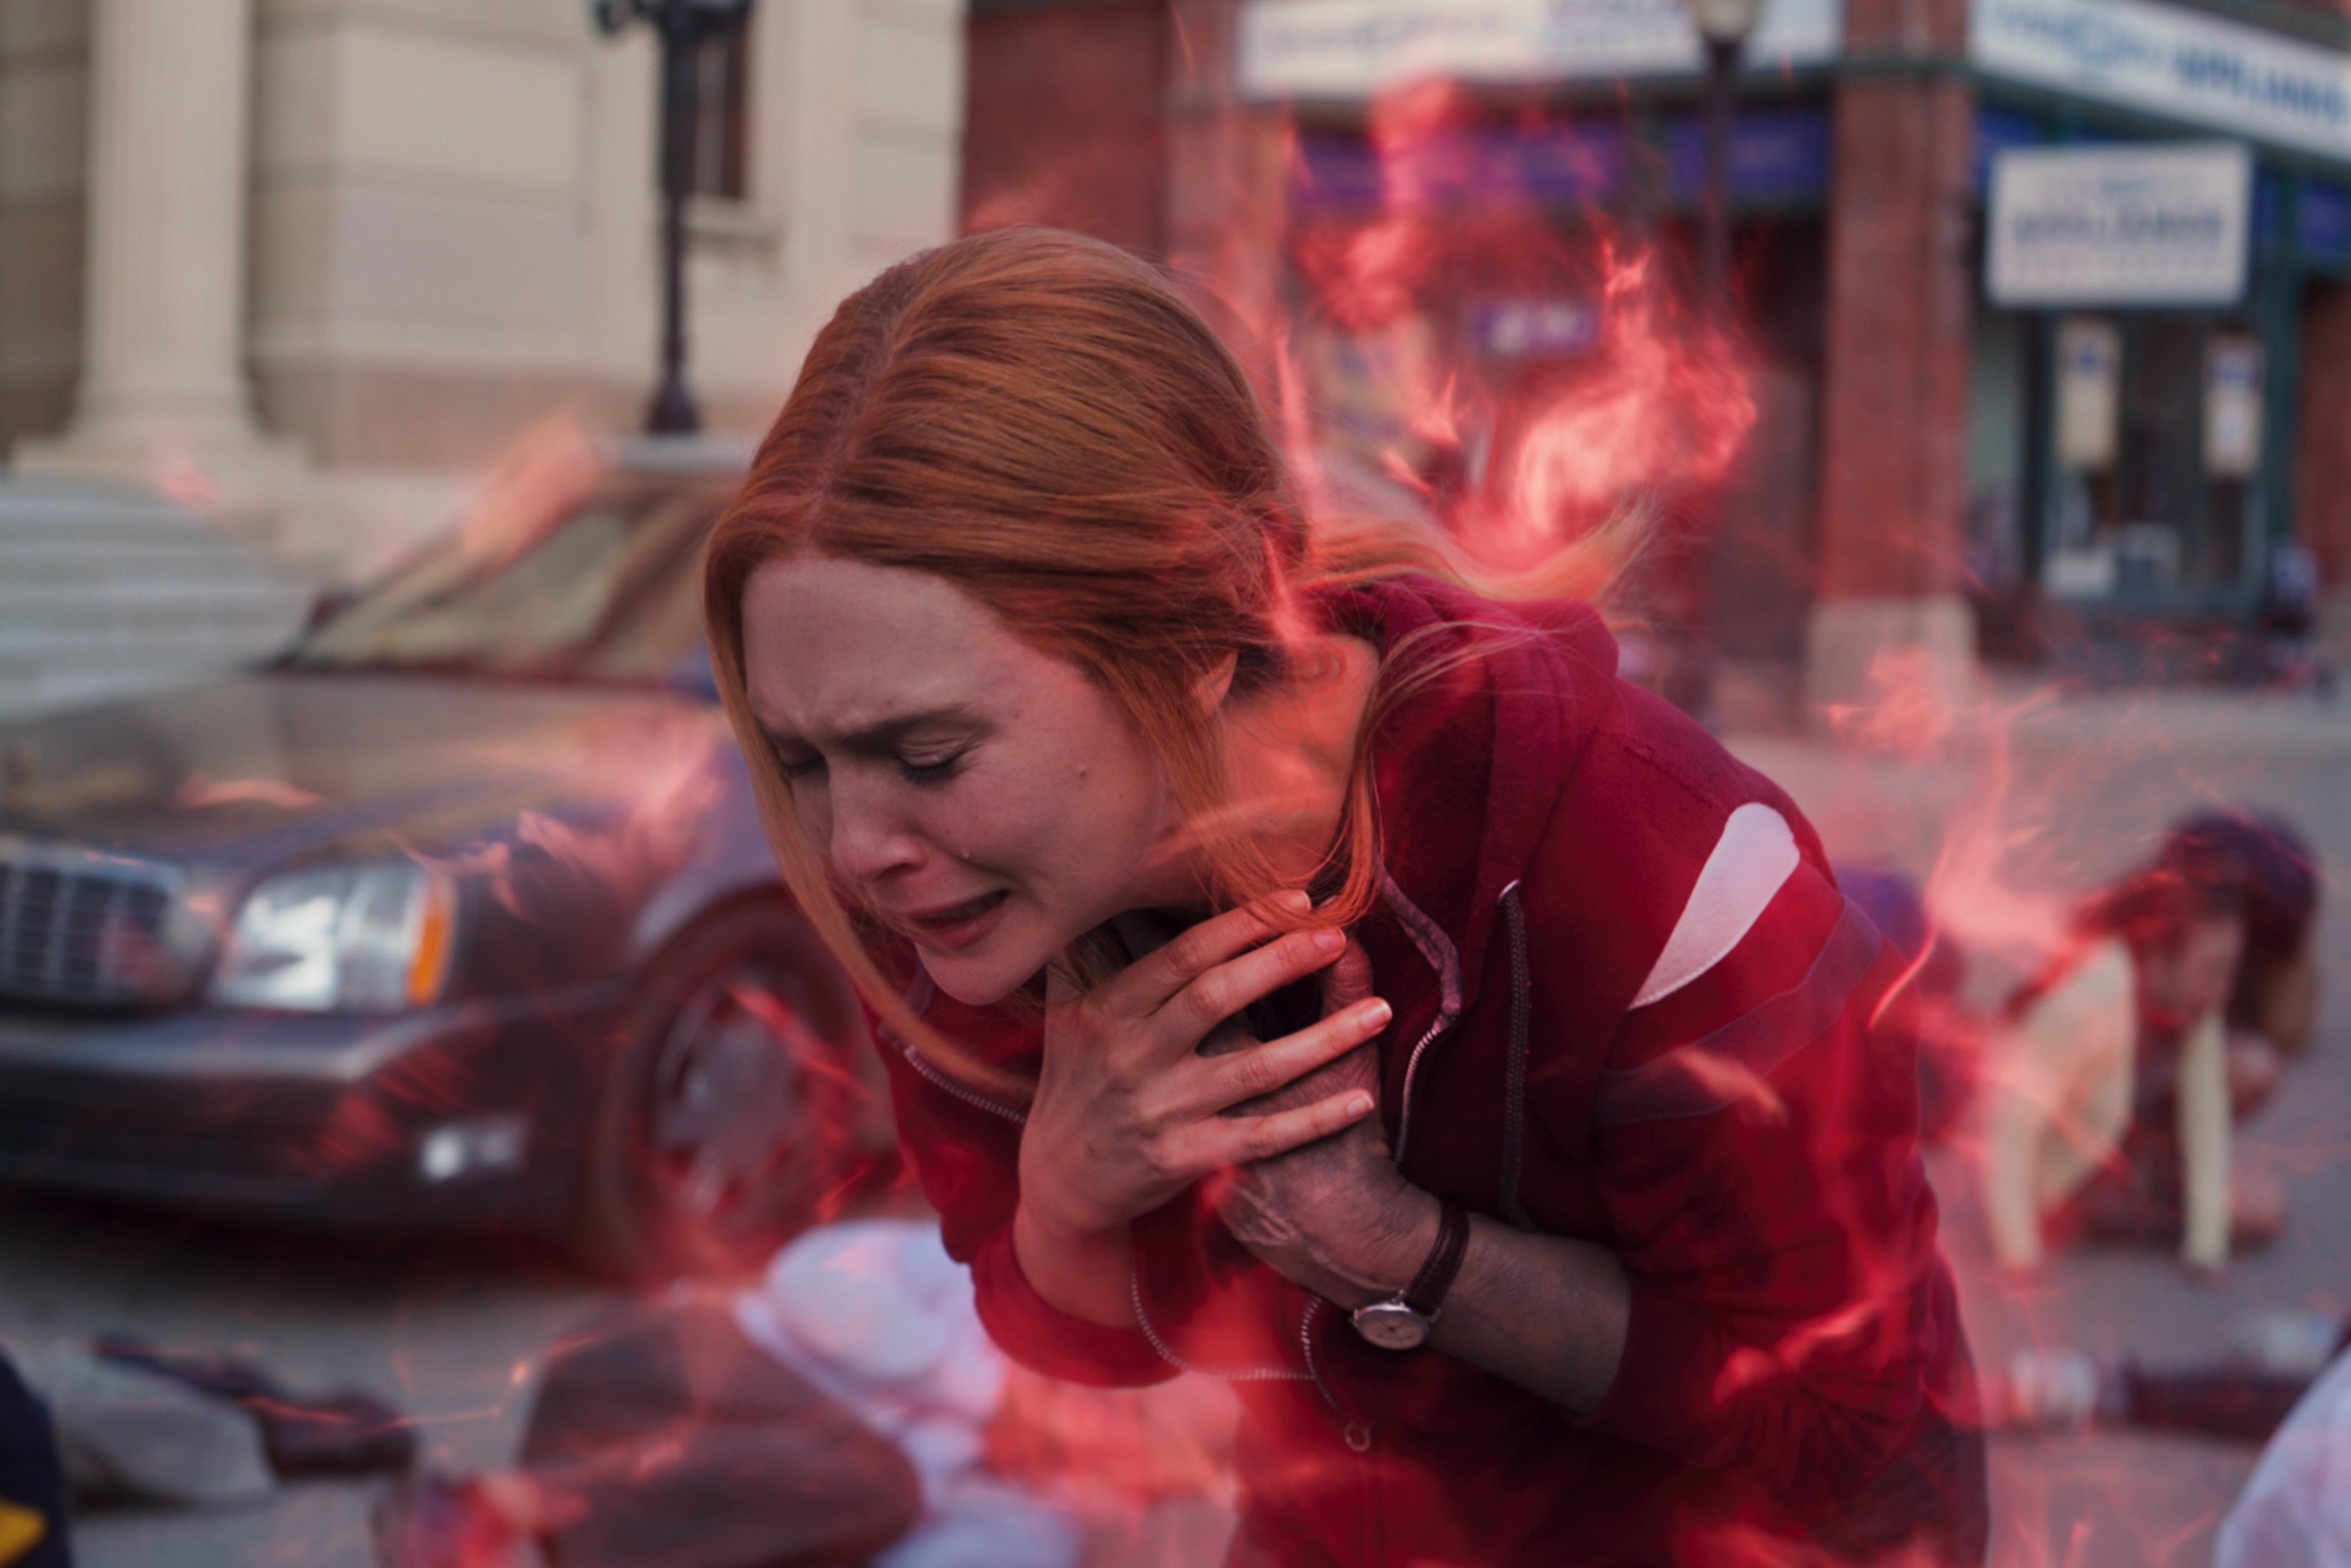 Is Scarlet Witch Actually a Villain in the MCU?